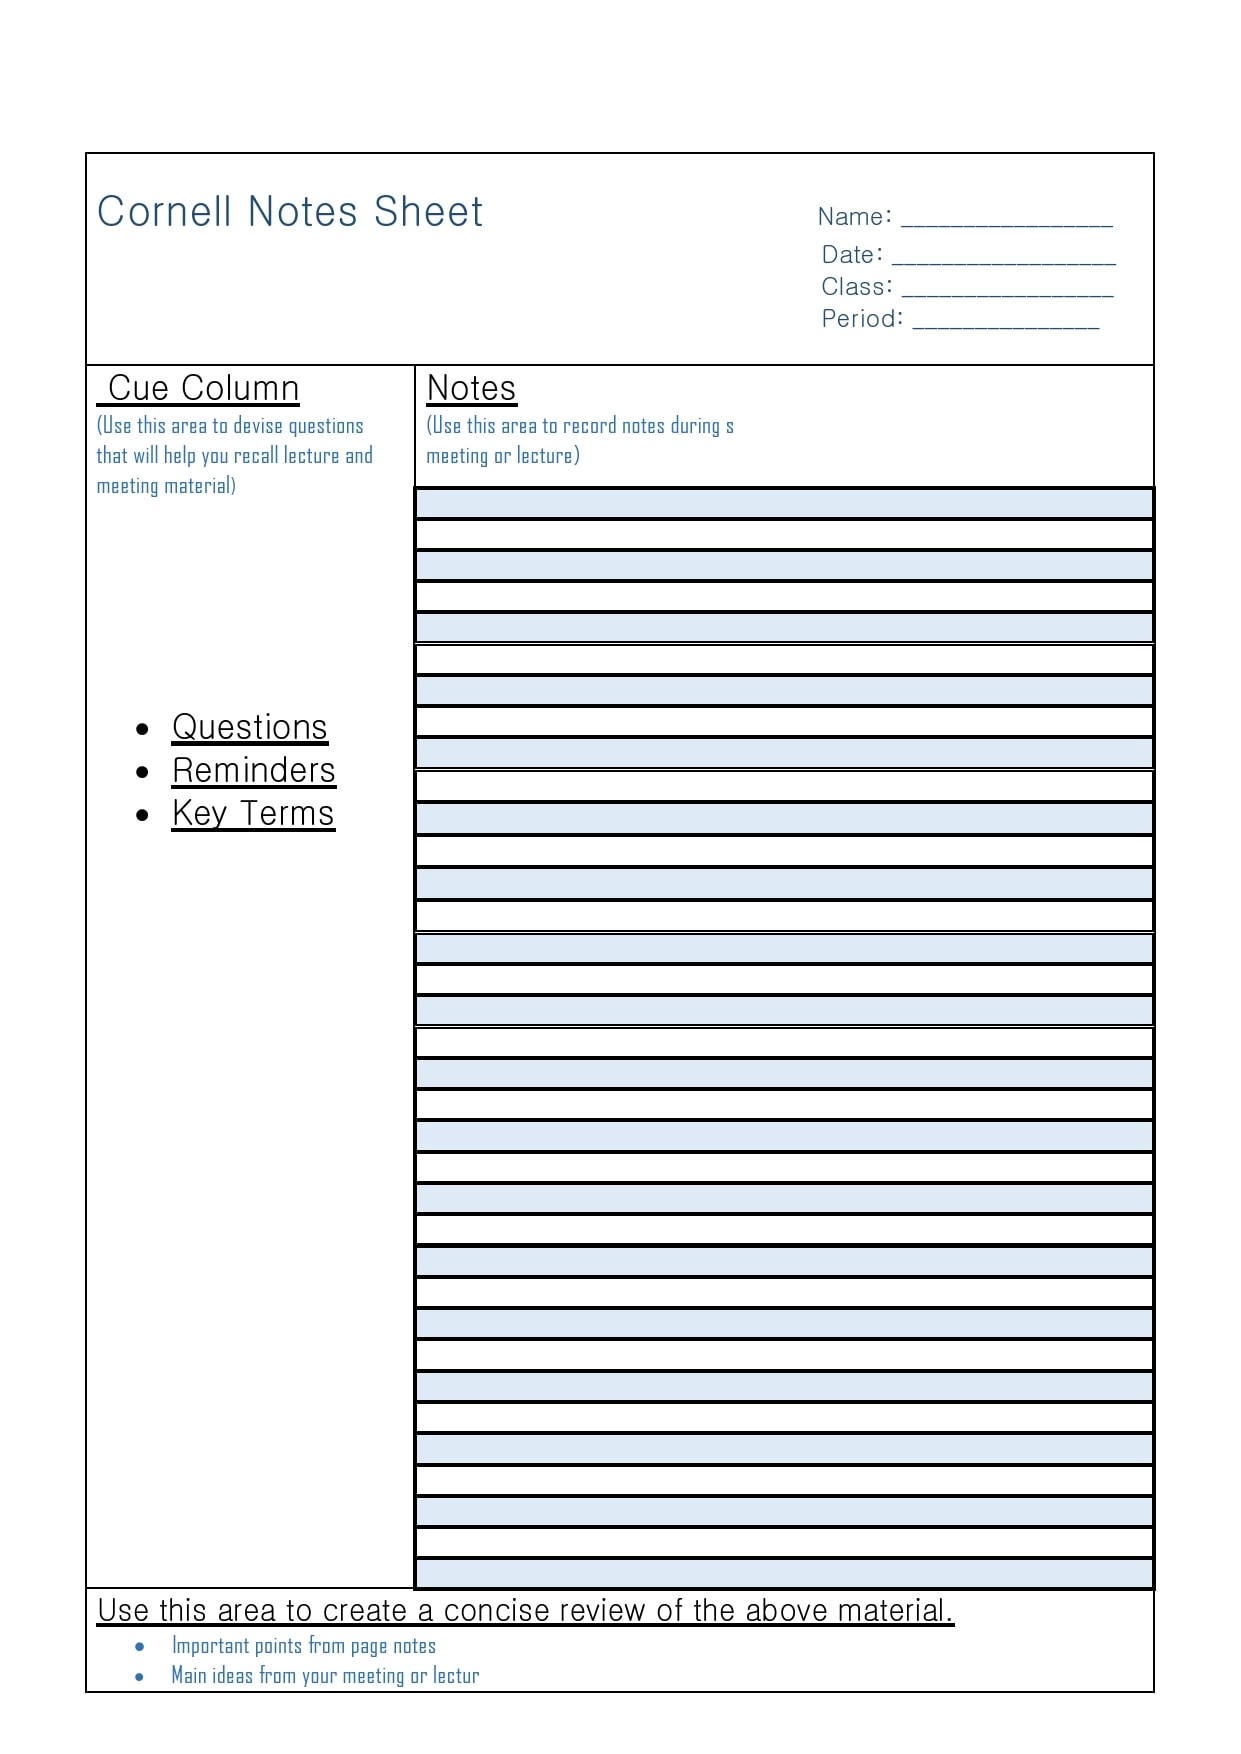 20 Printable Cornell Notes Templates [Free] - TemplateArchive Throughout Lecture Note Template